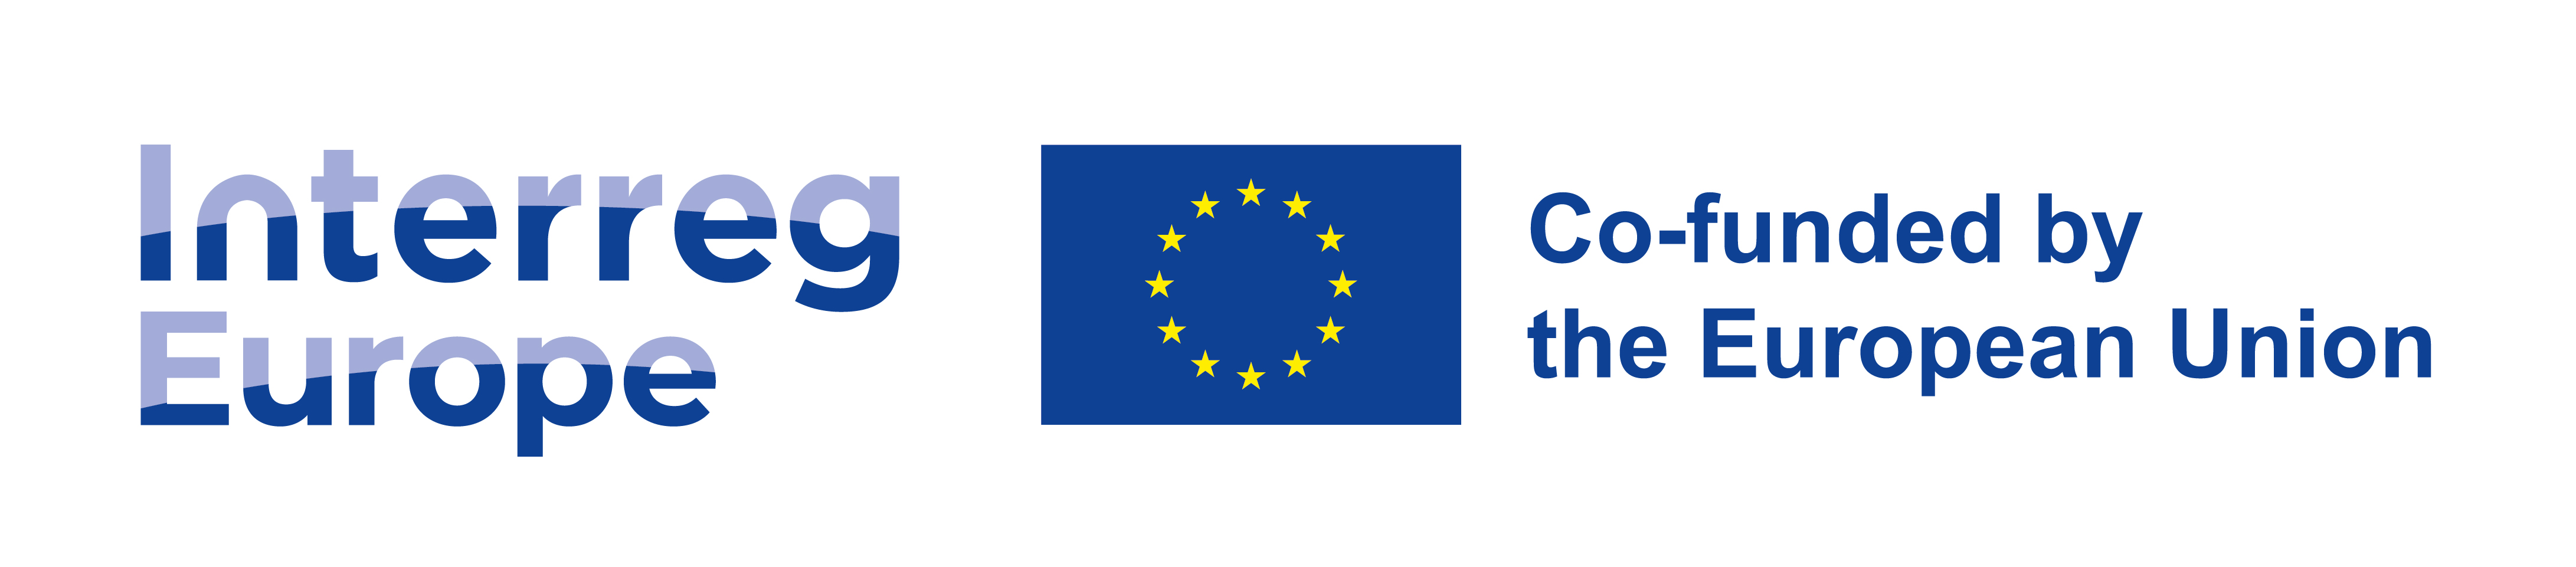 Interreg Europe. Co-funded by the European Union